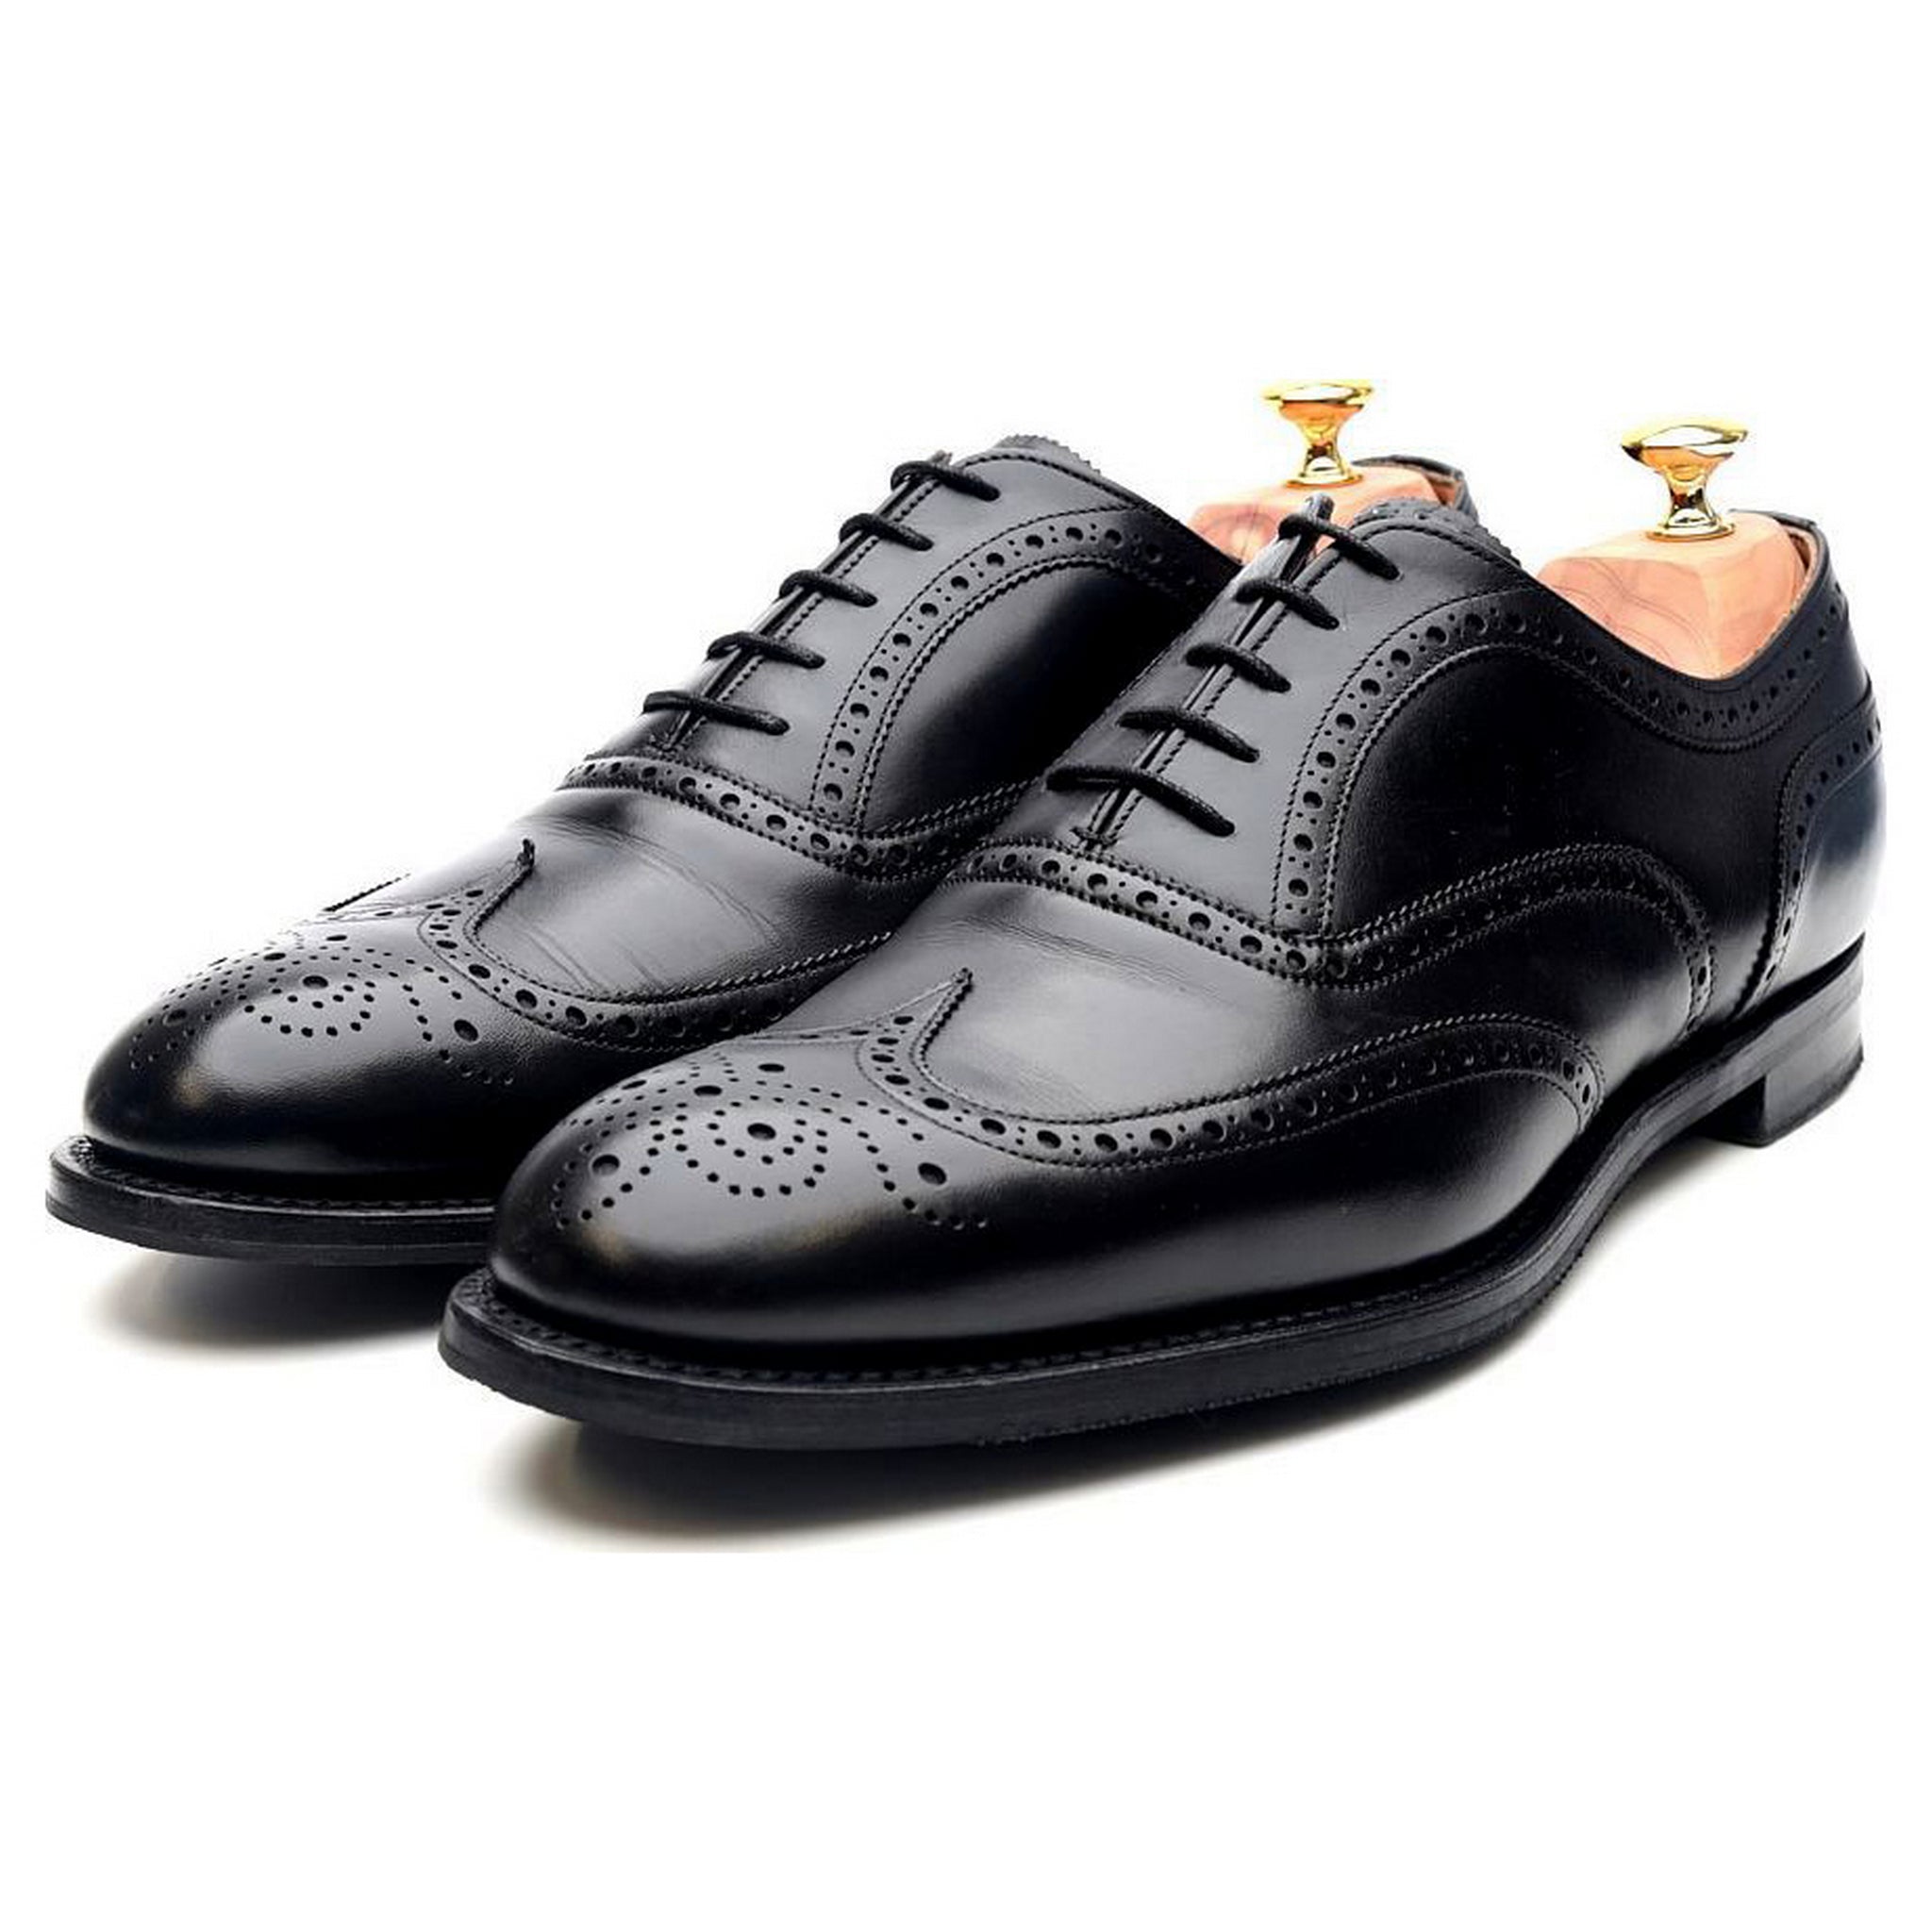 Arthur III' Black Leather Brogues UK 11 F - Abbot's Shoes